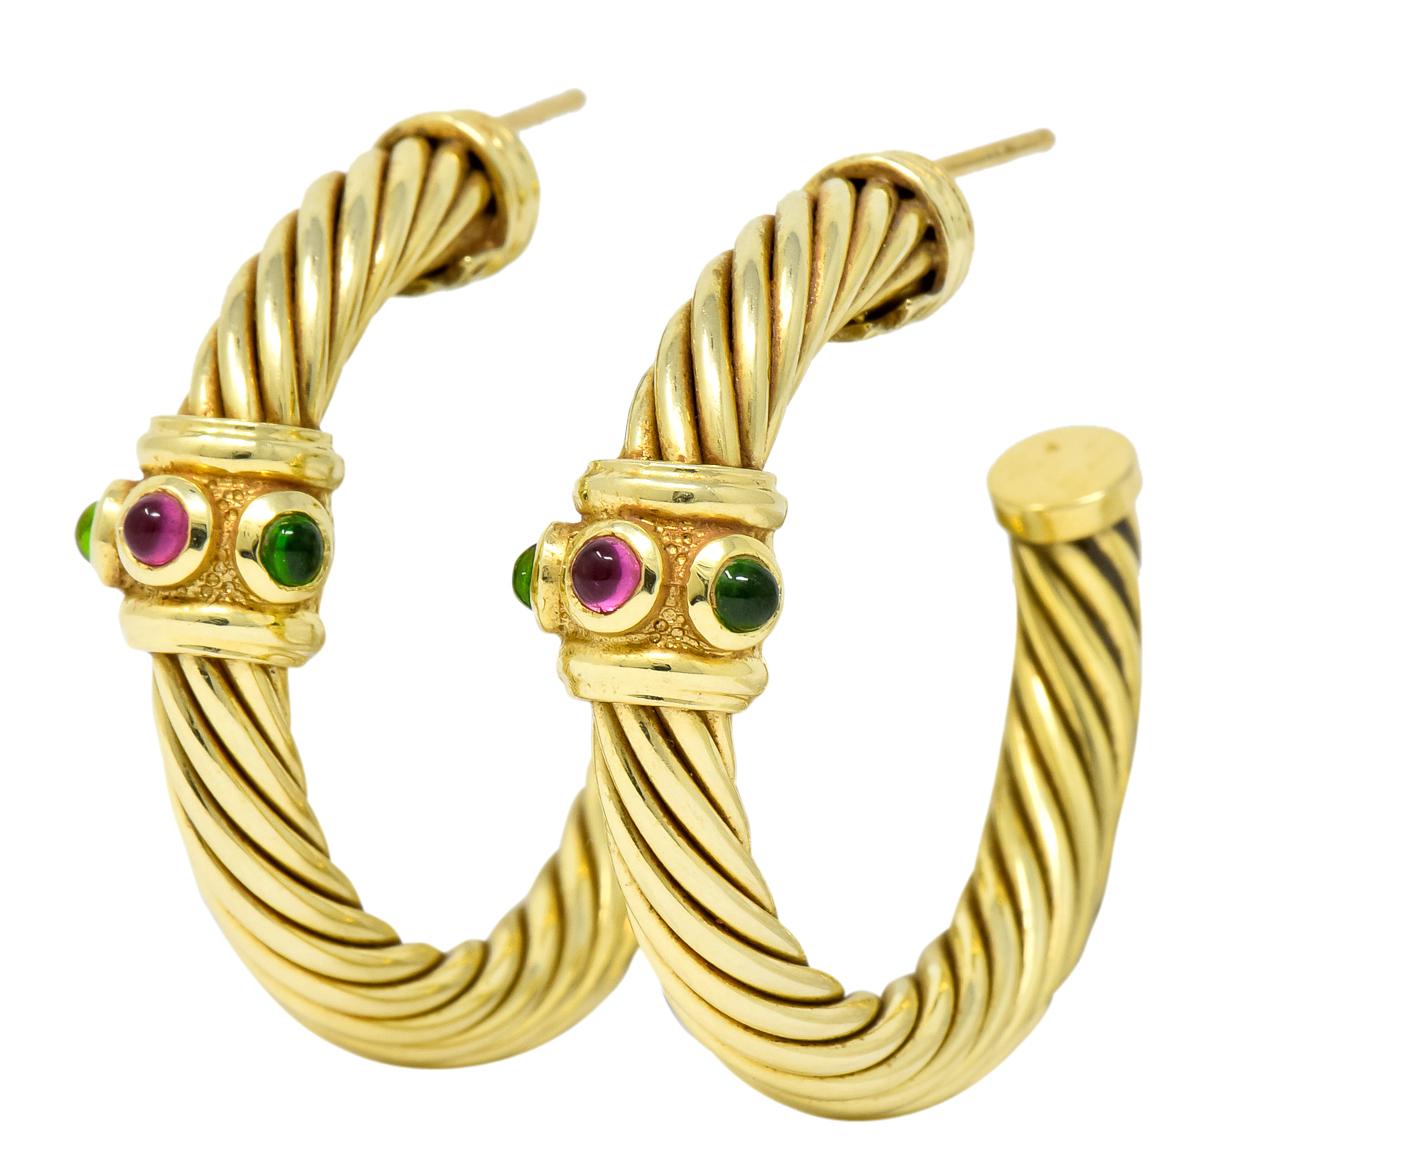 Hoop style earrings designed as twisted cable motif with polished gold terminals

Each featuring a textured gold station bezel set with round cabochon cut green tourmalines and a rhodolite garnet measuring approximately 2.5 mm

Post and friction